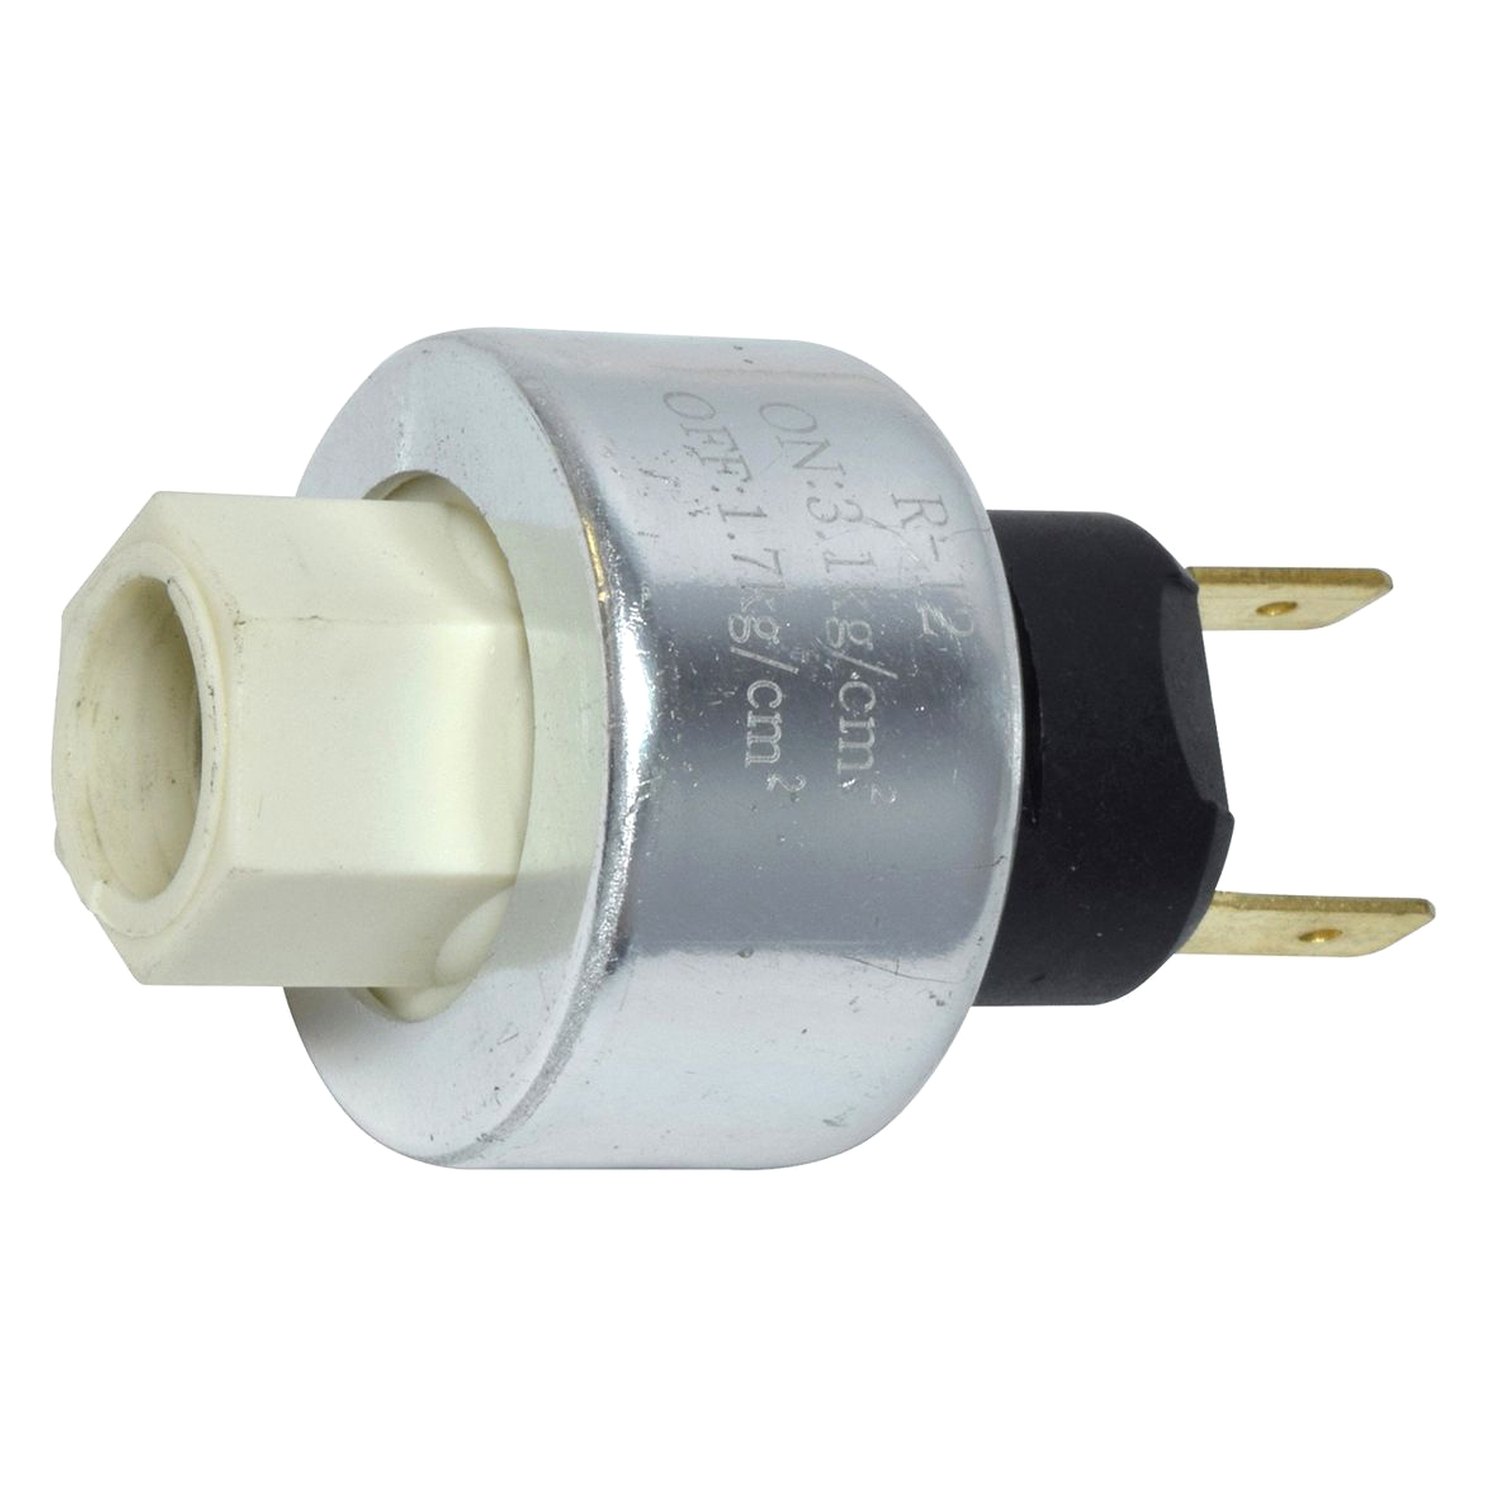 Universal Air Conditioner SW 1016C Push Button Switch 